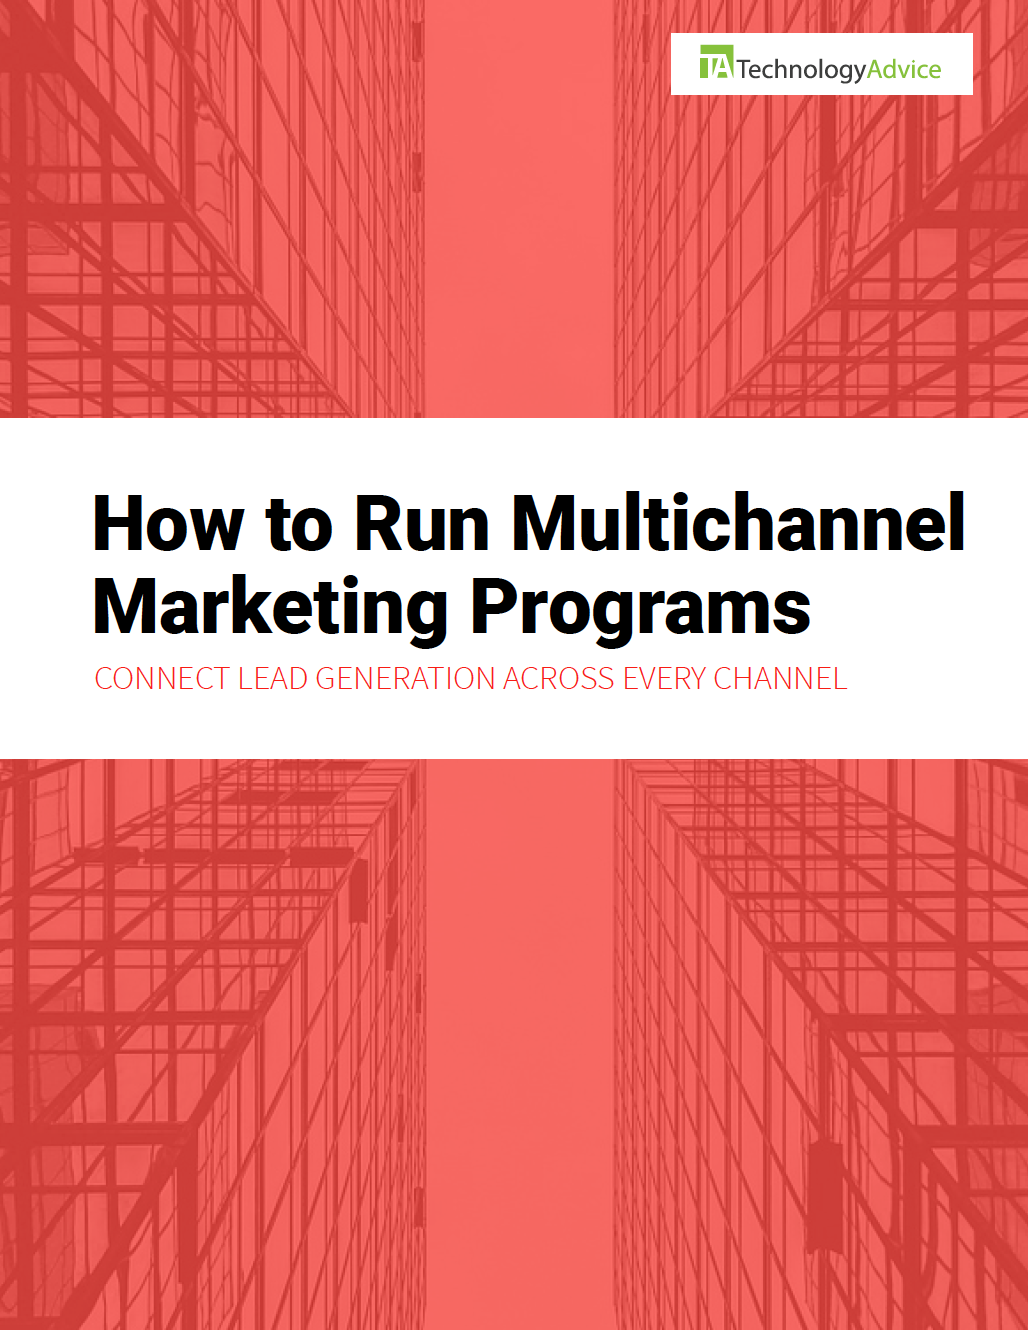 TechnologyAdvice Research Guide: The Multichannel Marketing Handbook